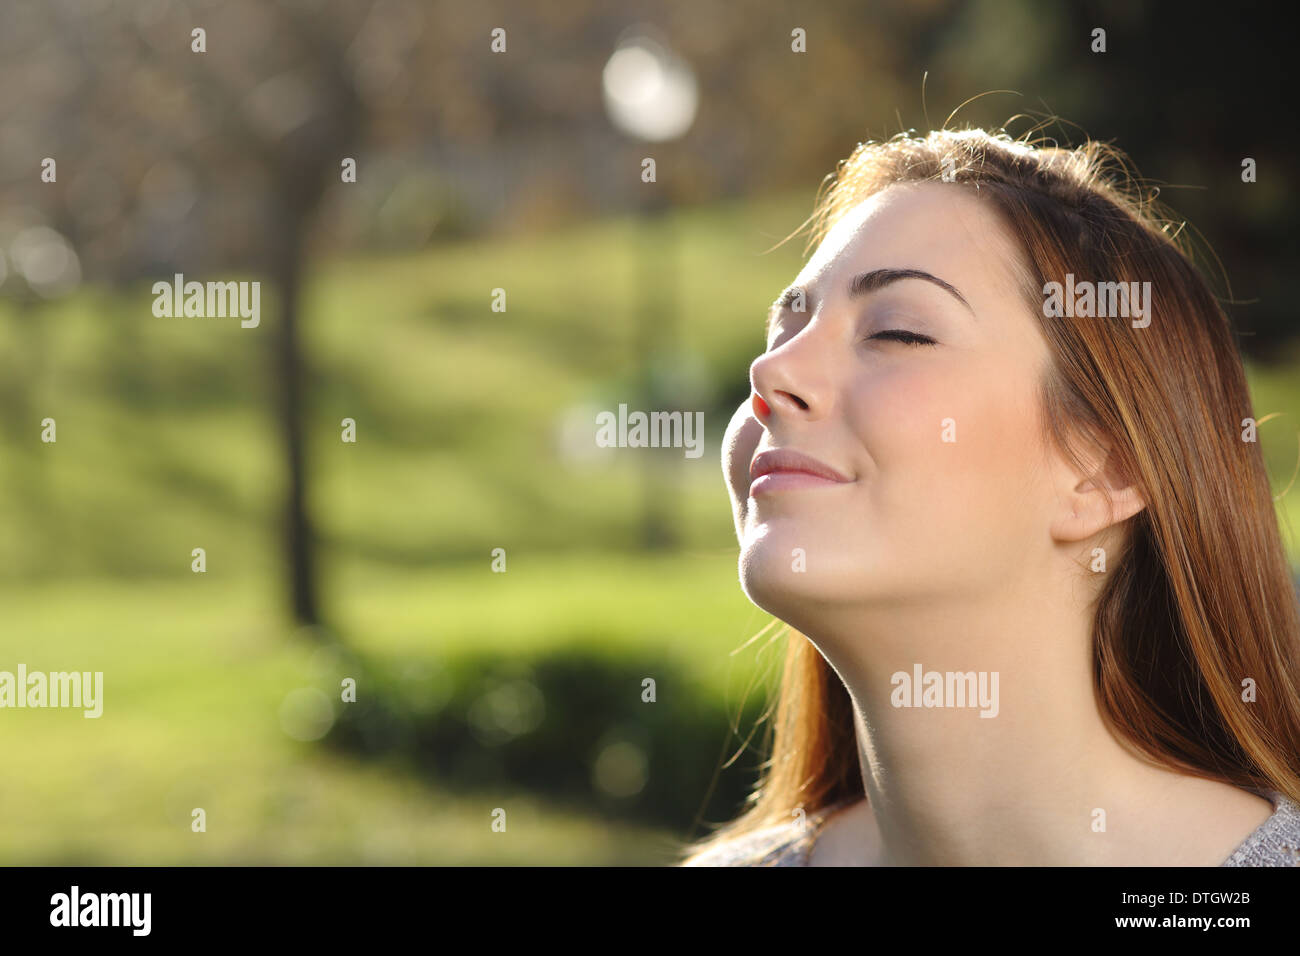 Portrait of a relaxed woman breathing deep in a park with a warmth background and backlit Stock Photo